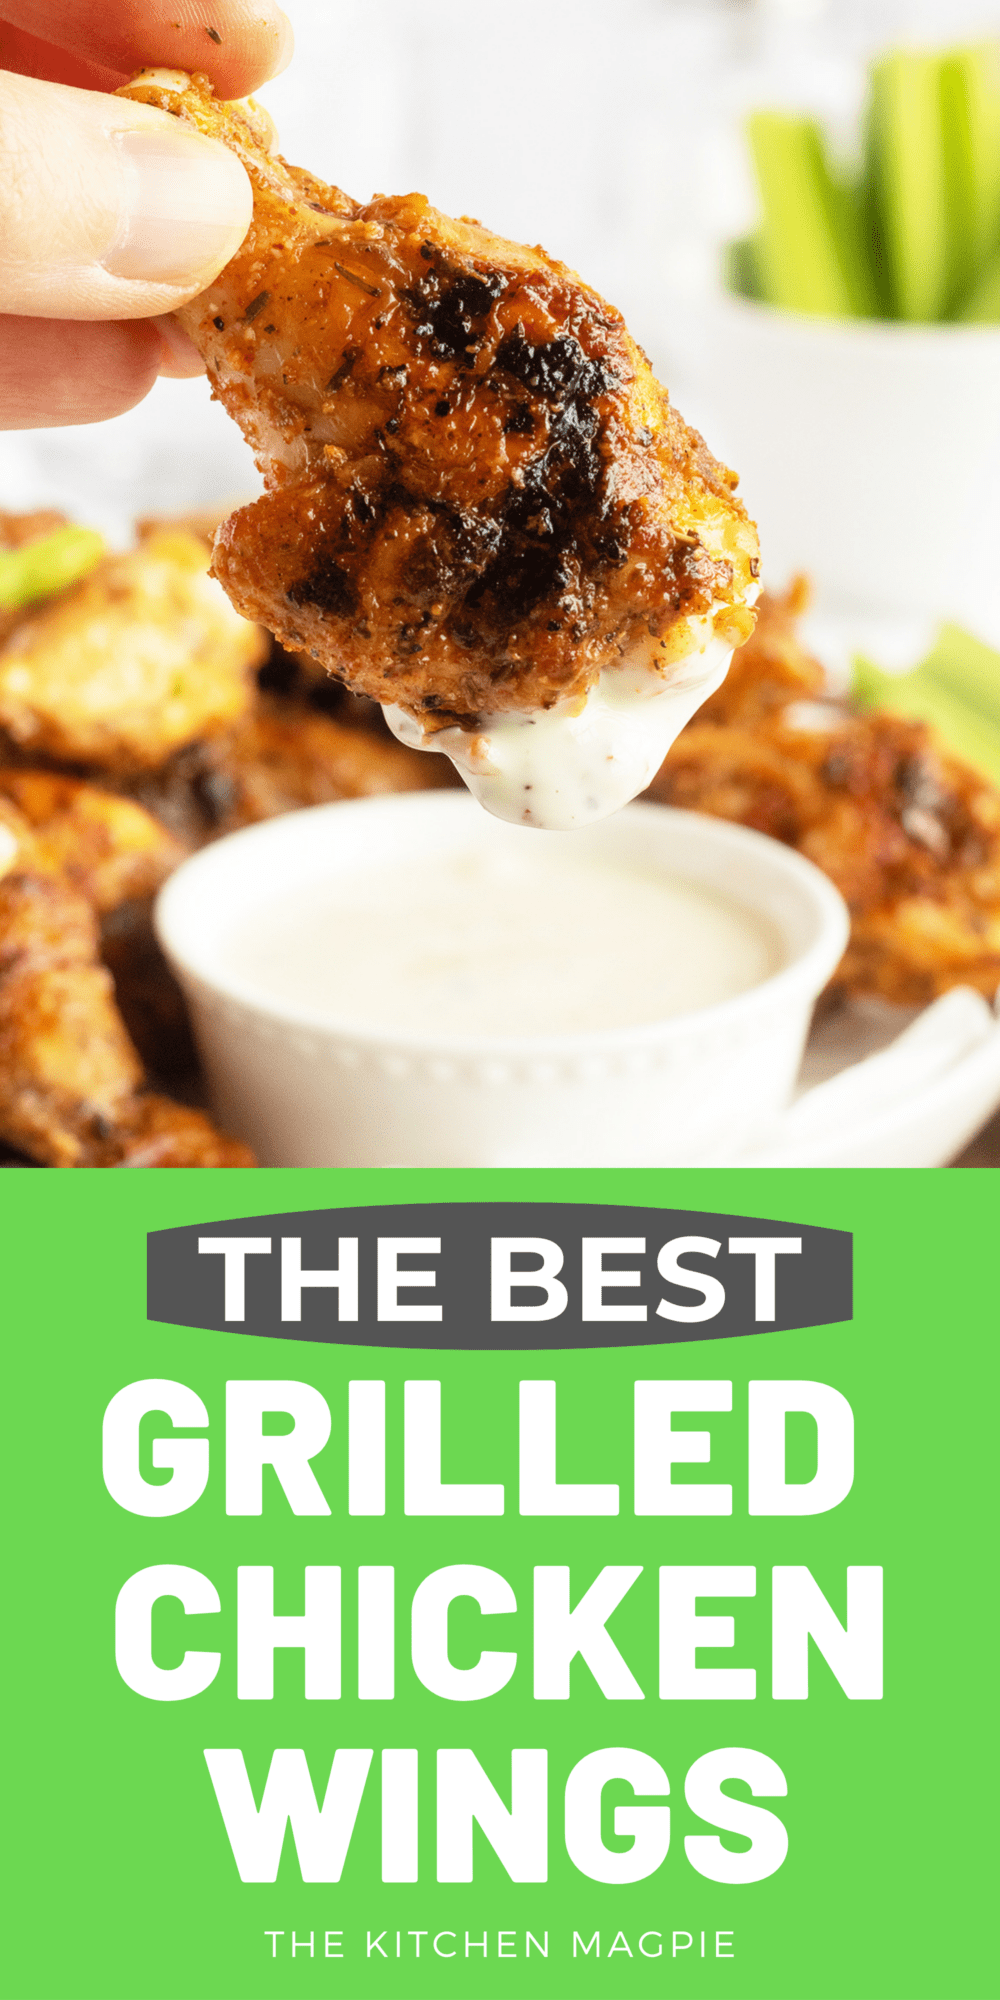 Nothing beats crispy grilled chicken wings; use this delicious chicken wing rub to flavor them up, and then grill them to crispy, juicy perfection!